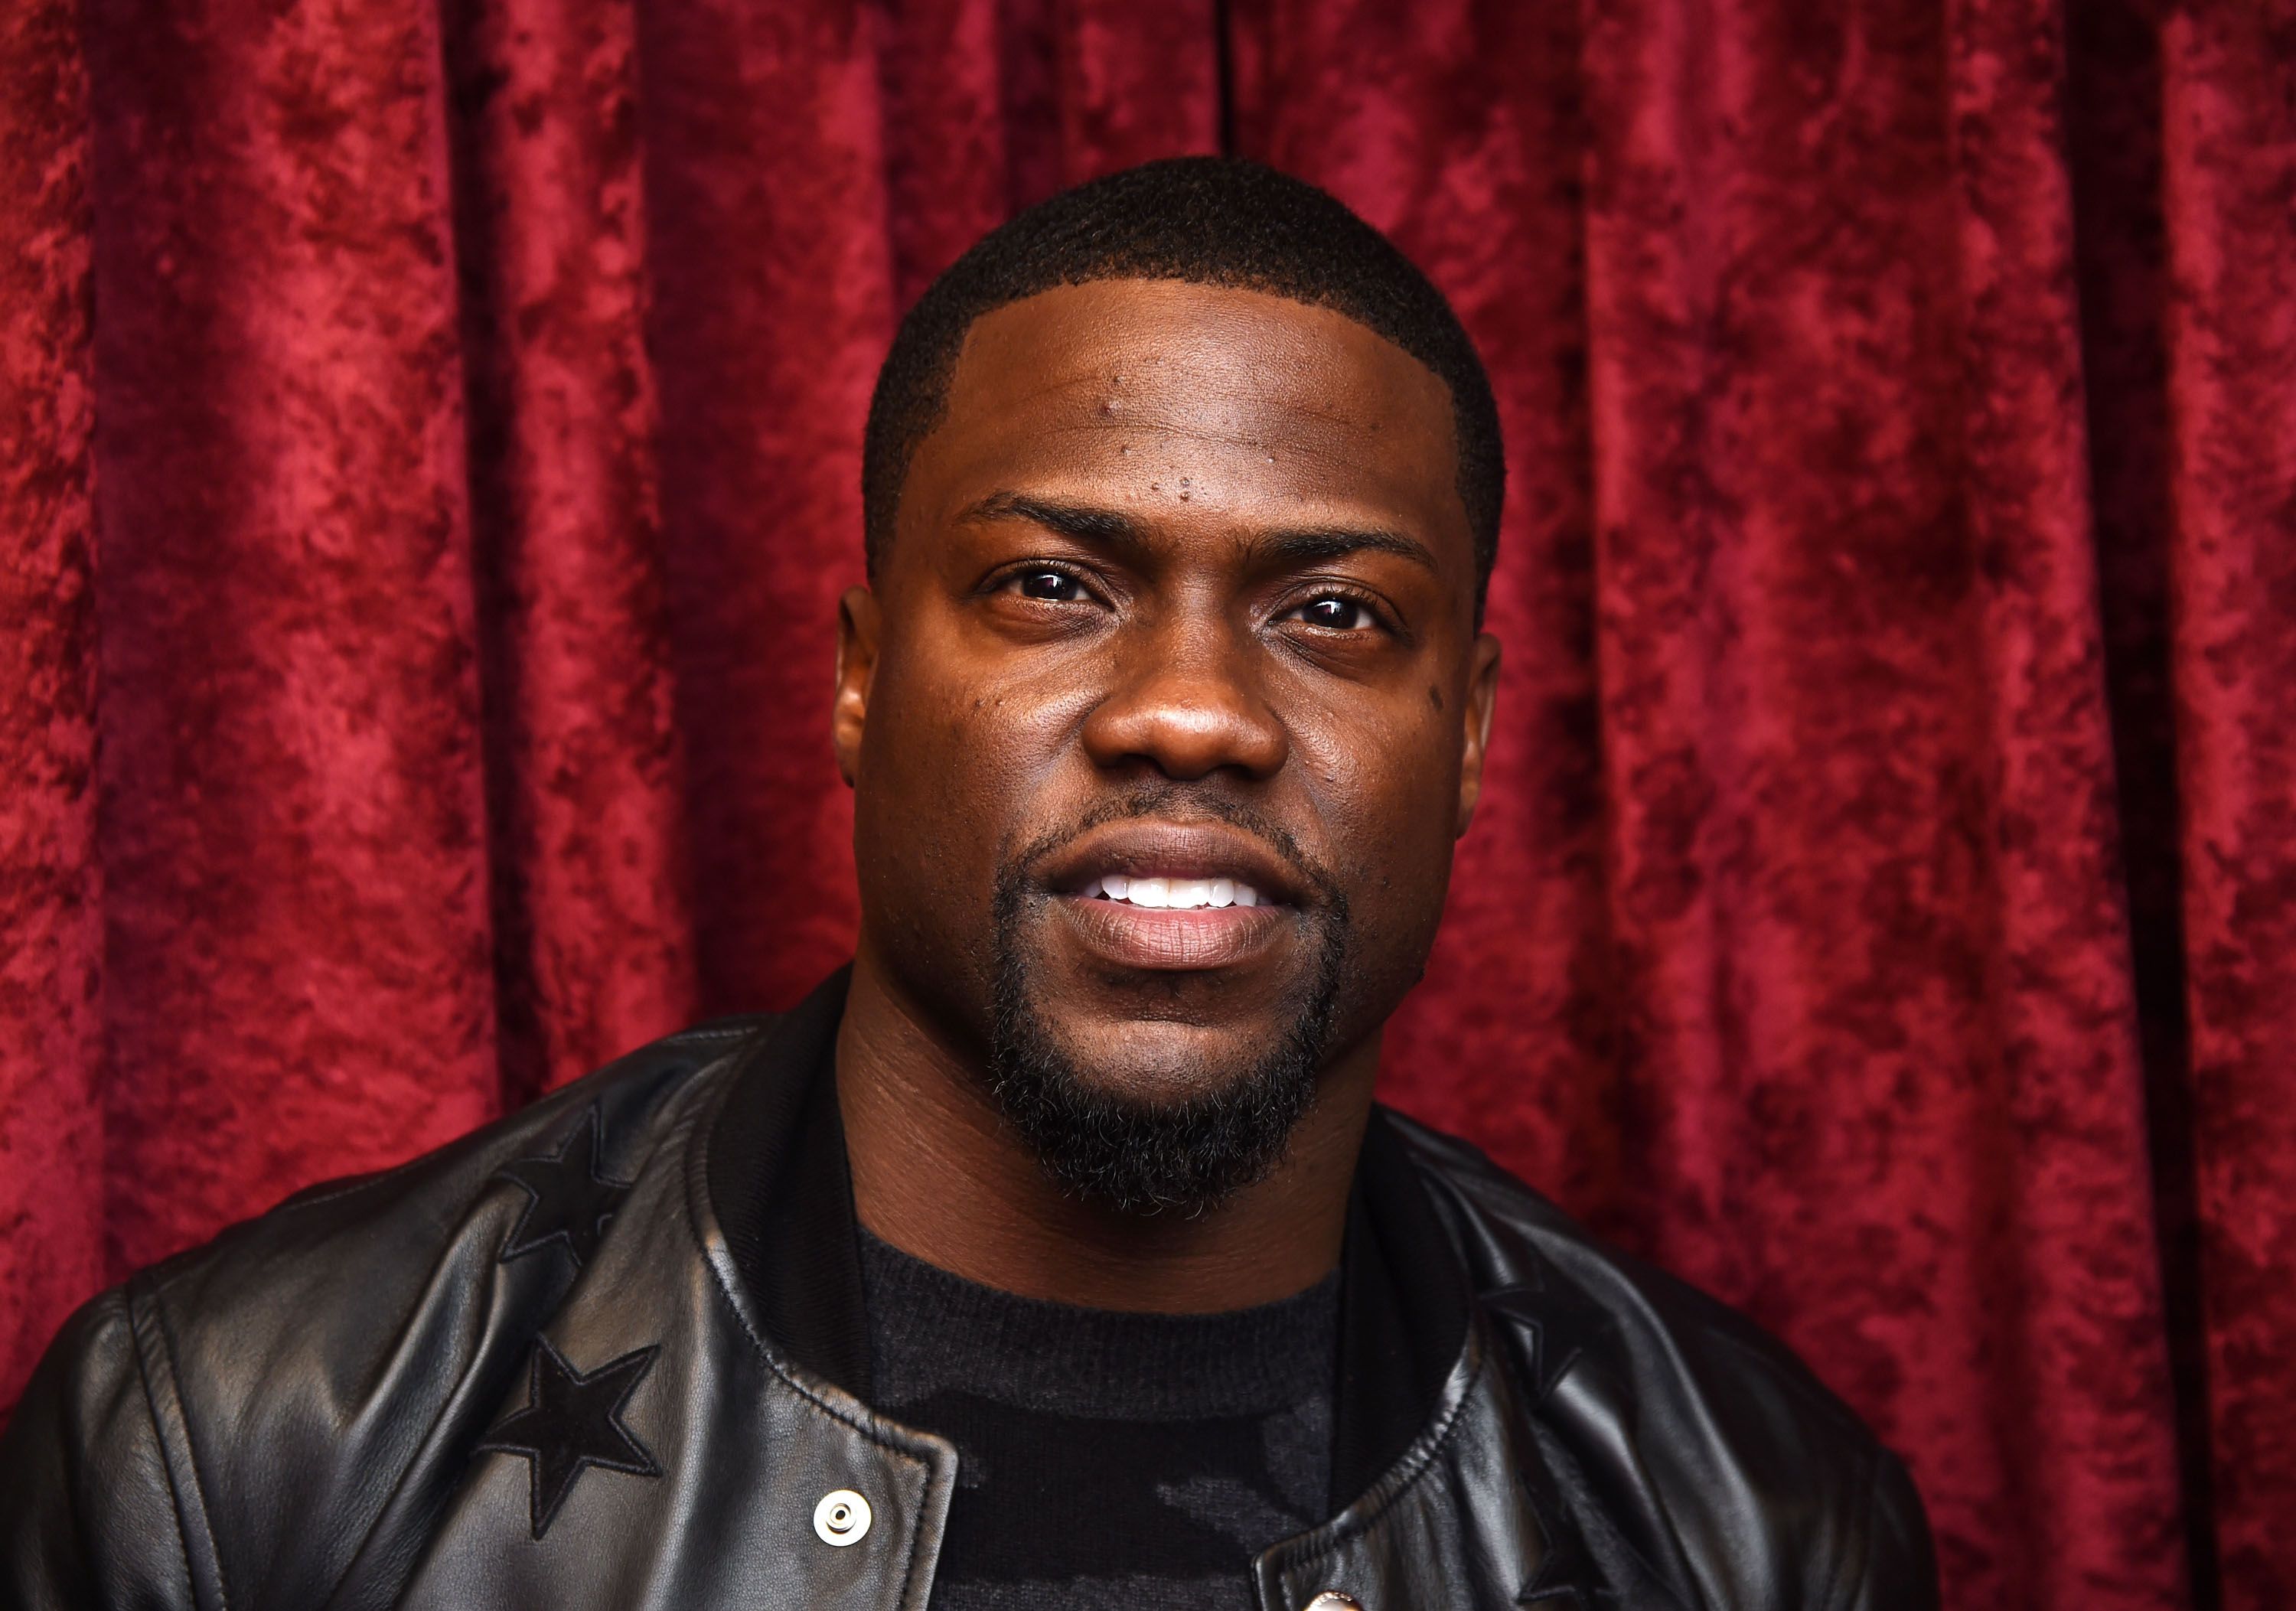 Comedian Kevin Hart visits the SiriusXM Studios on March 18, 2015 | Photo: Getty Images